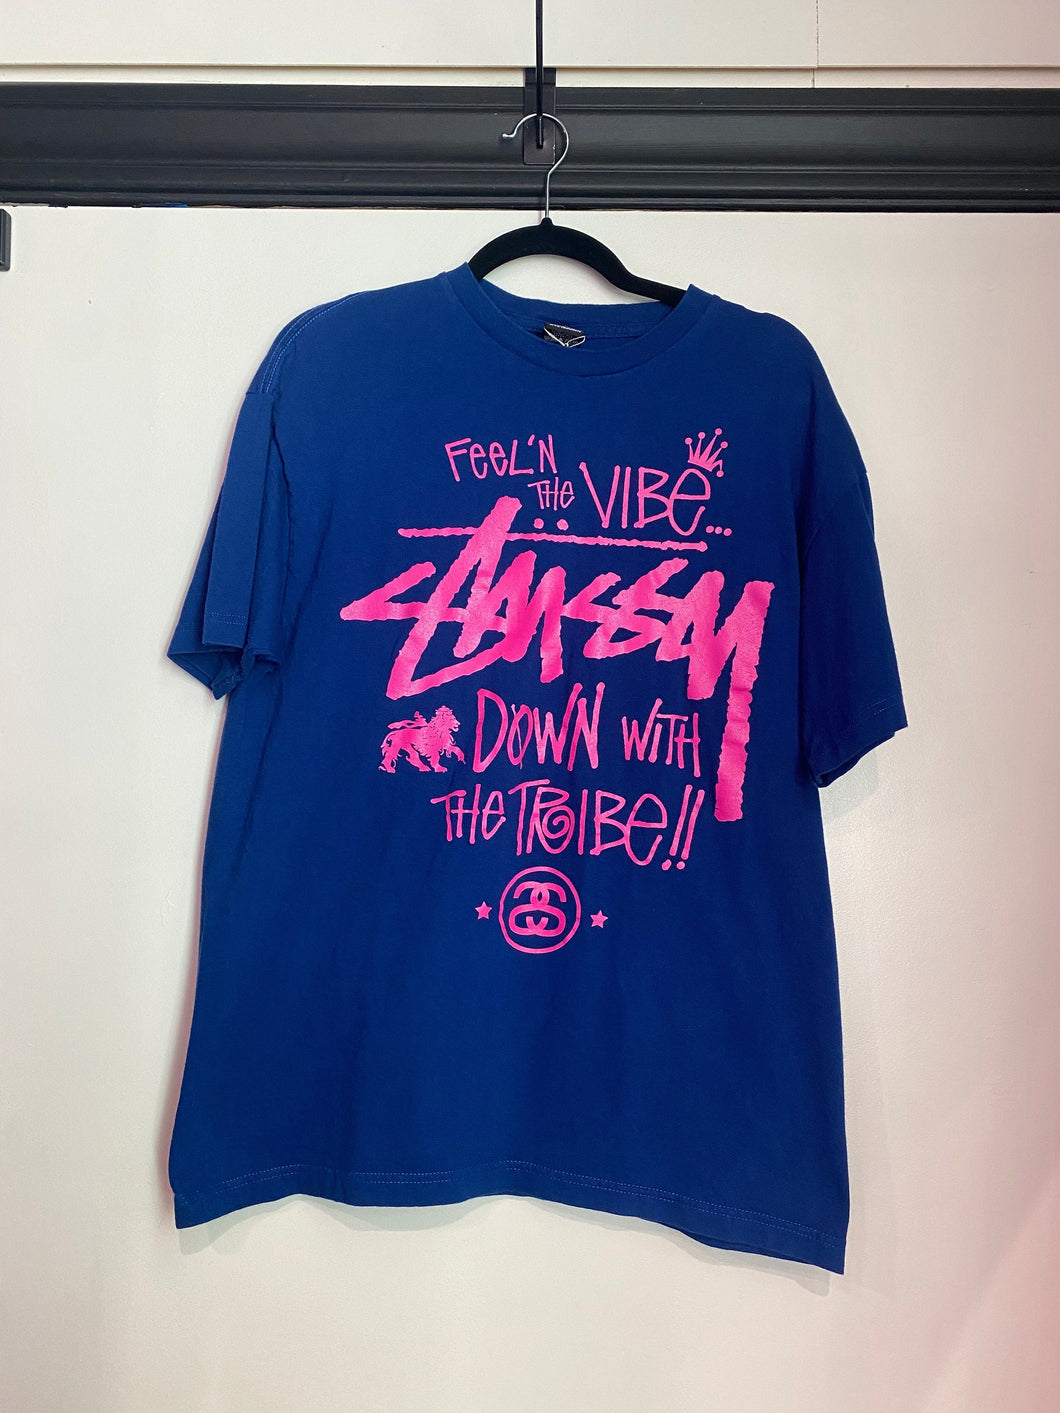 Vintage Stüssy Blue Feelin the Vibe Down with the Tribe T-Shirt / 80s 90s 2000s Graphic Tee